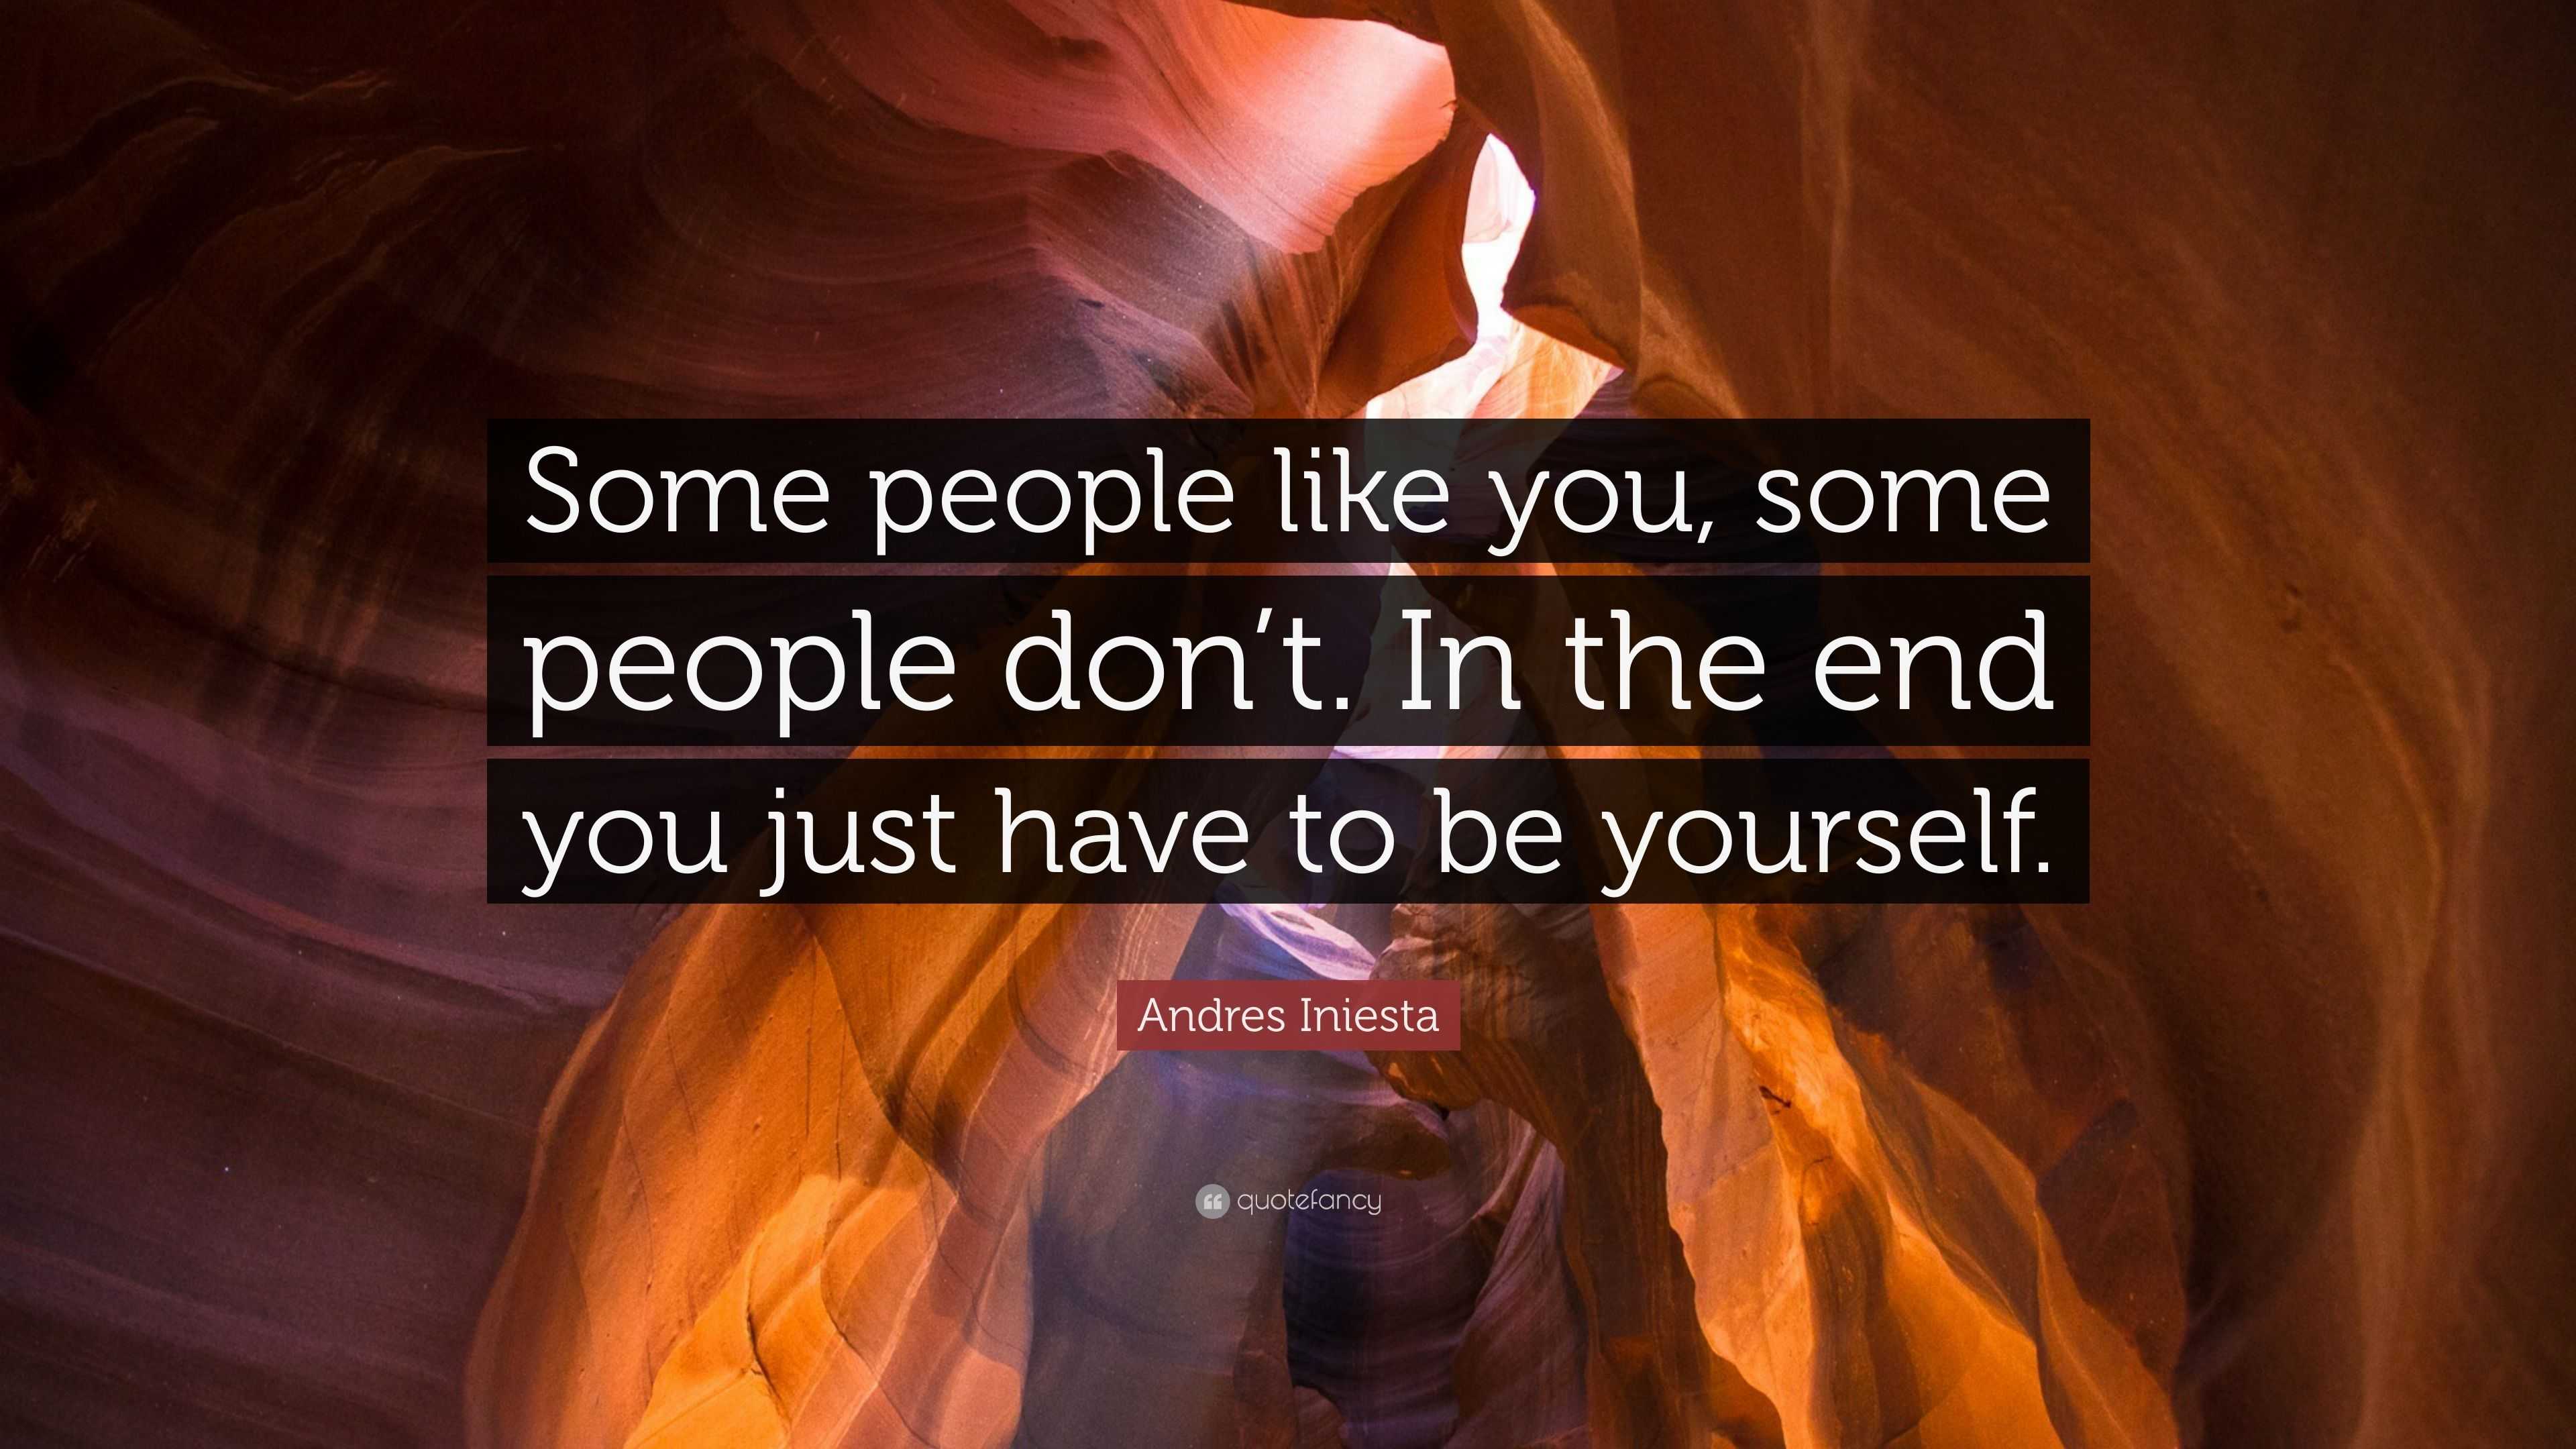 Andres Iniesta Quote Some People Like You Some People Don T In The End You Just Have To Be Yourself 7 Wallpapers Quotefancy